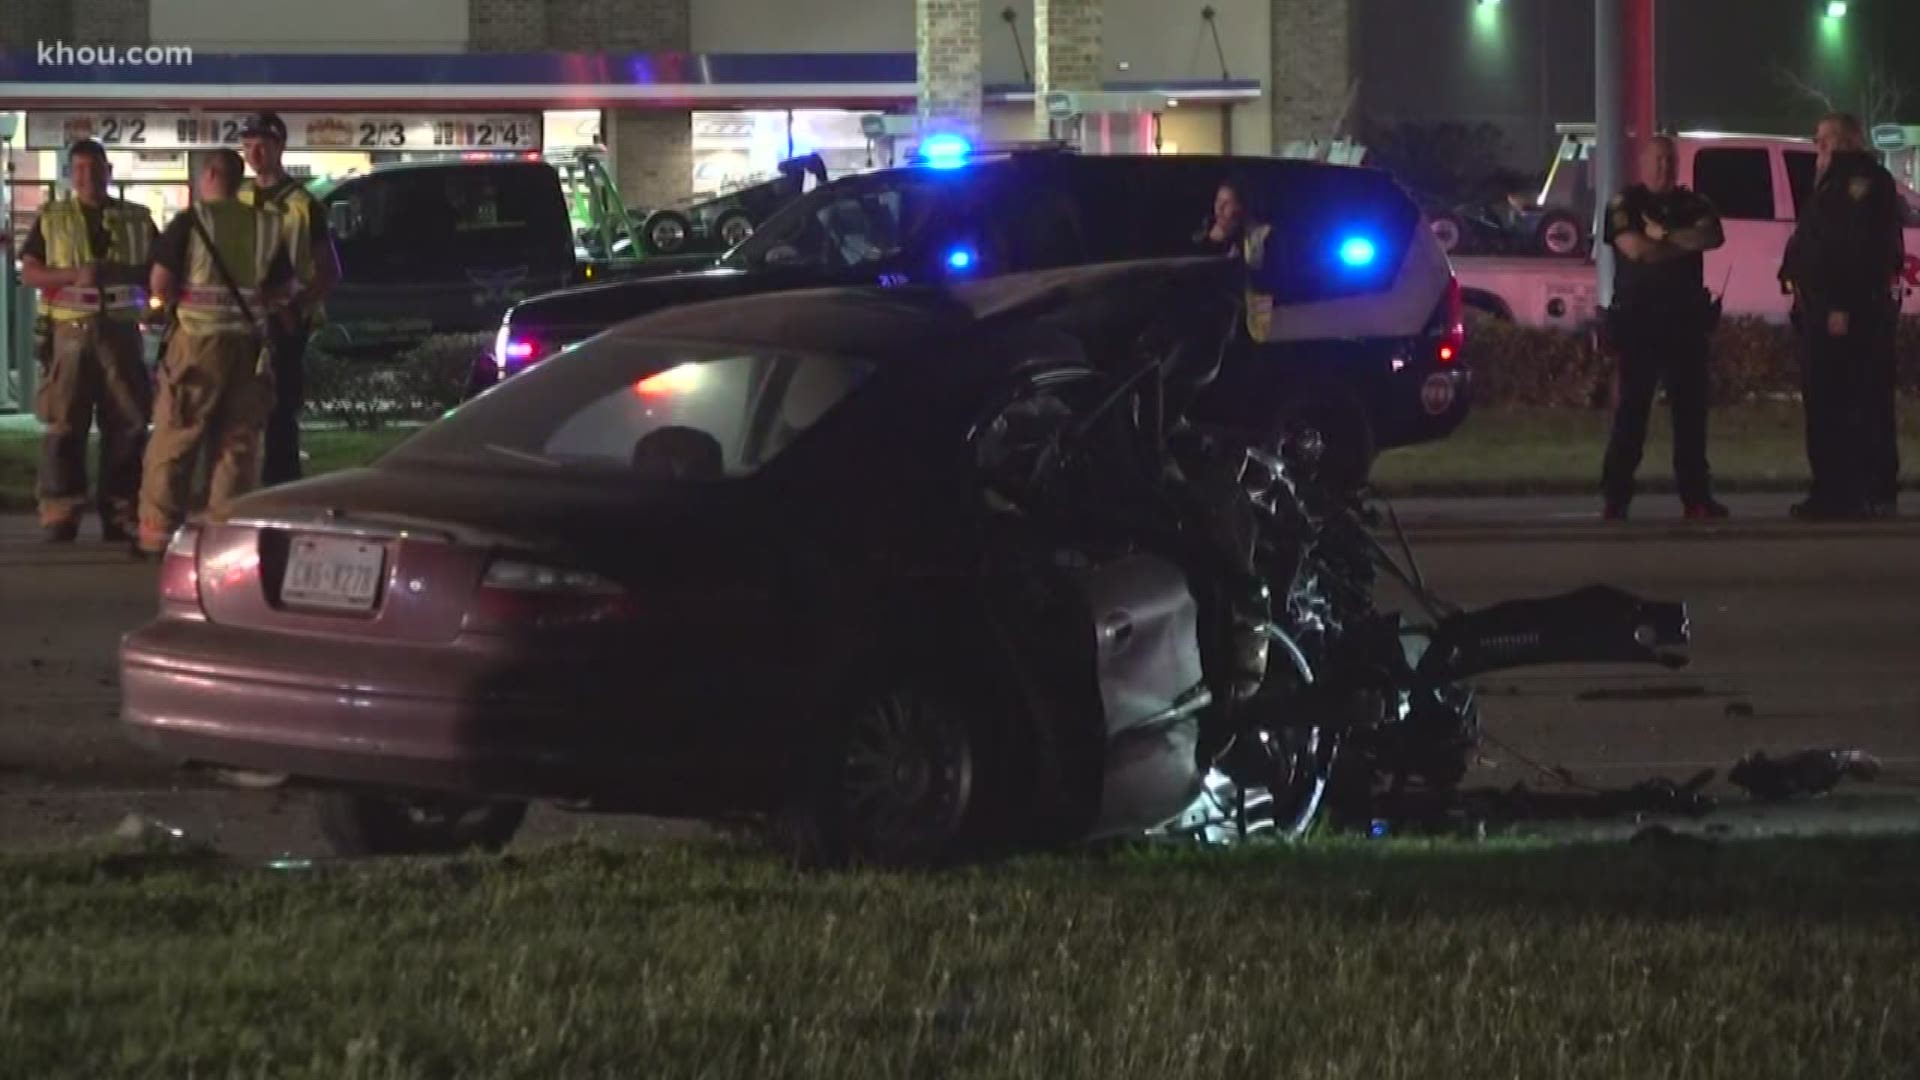 Three people are dead after a wrong-way crash on Highway 249 in northwest Harris County. The driver at fault showed signs of impairment, according to investigators.